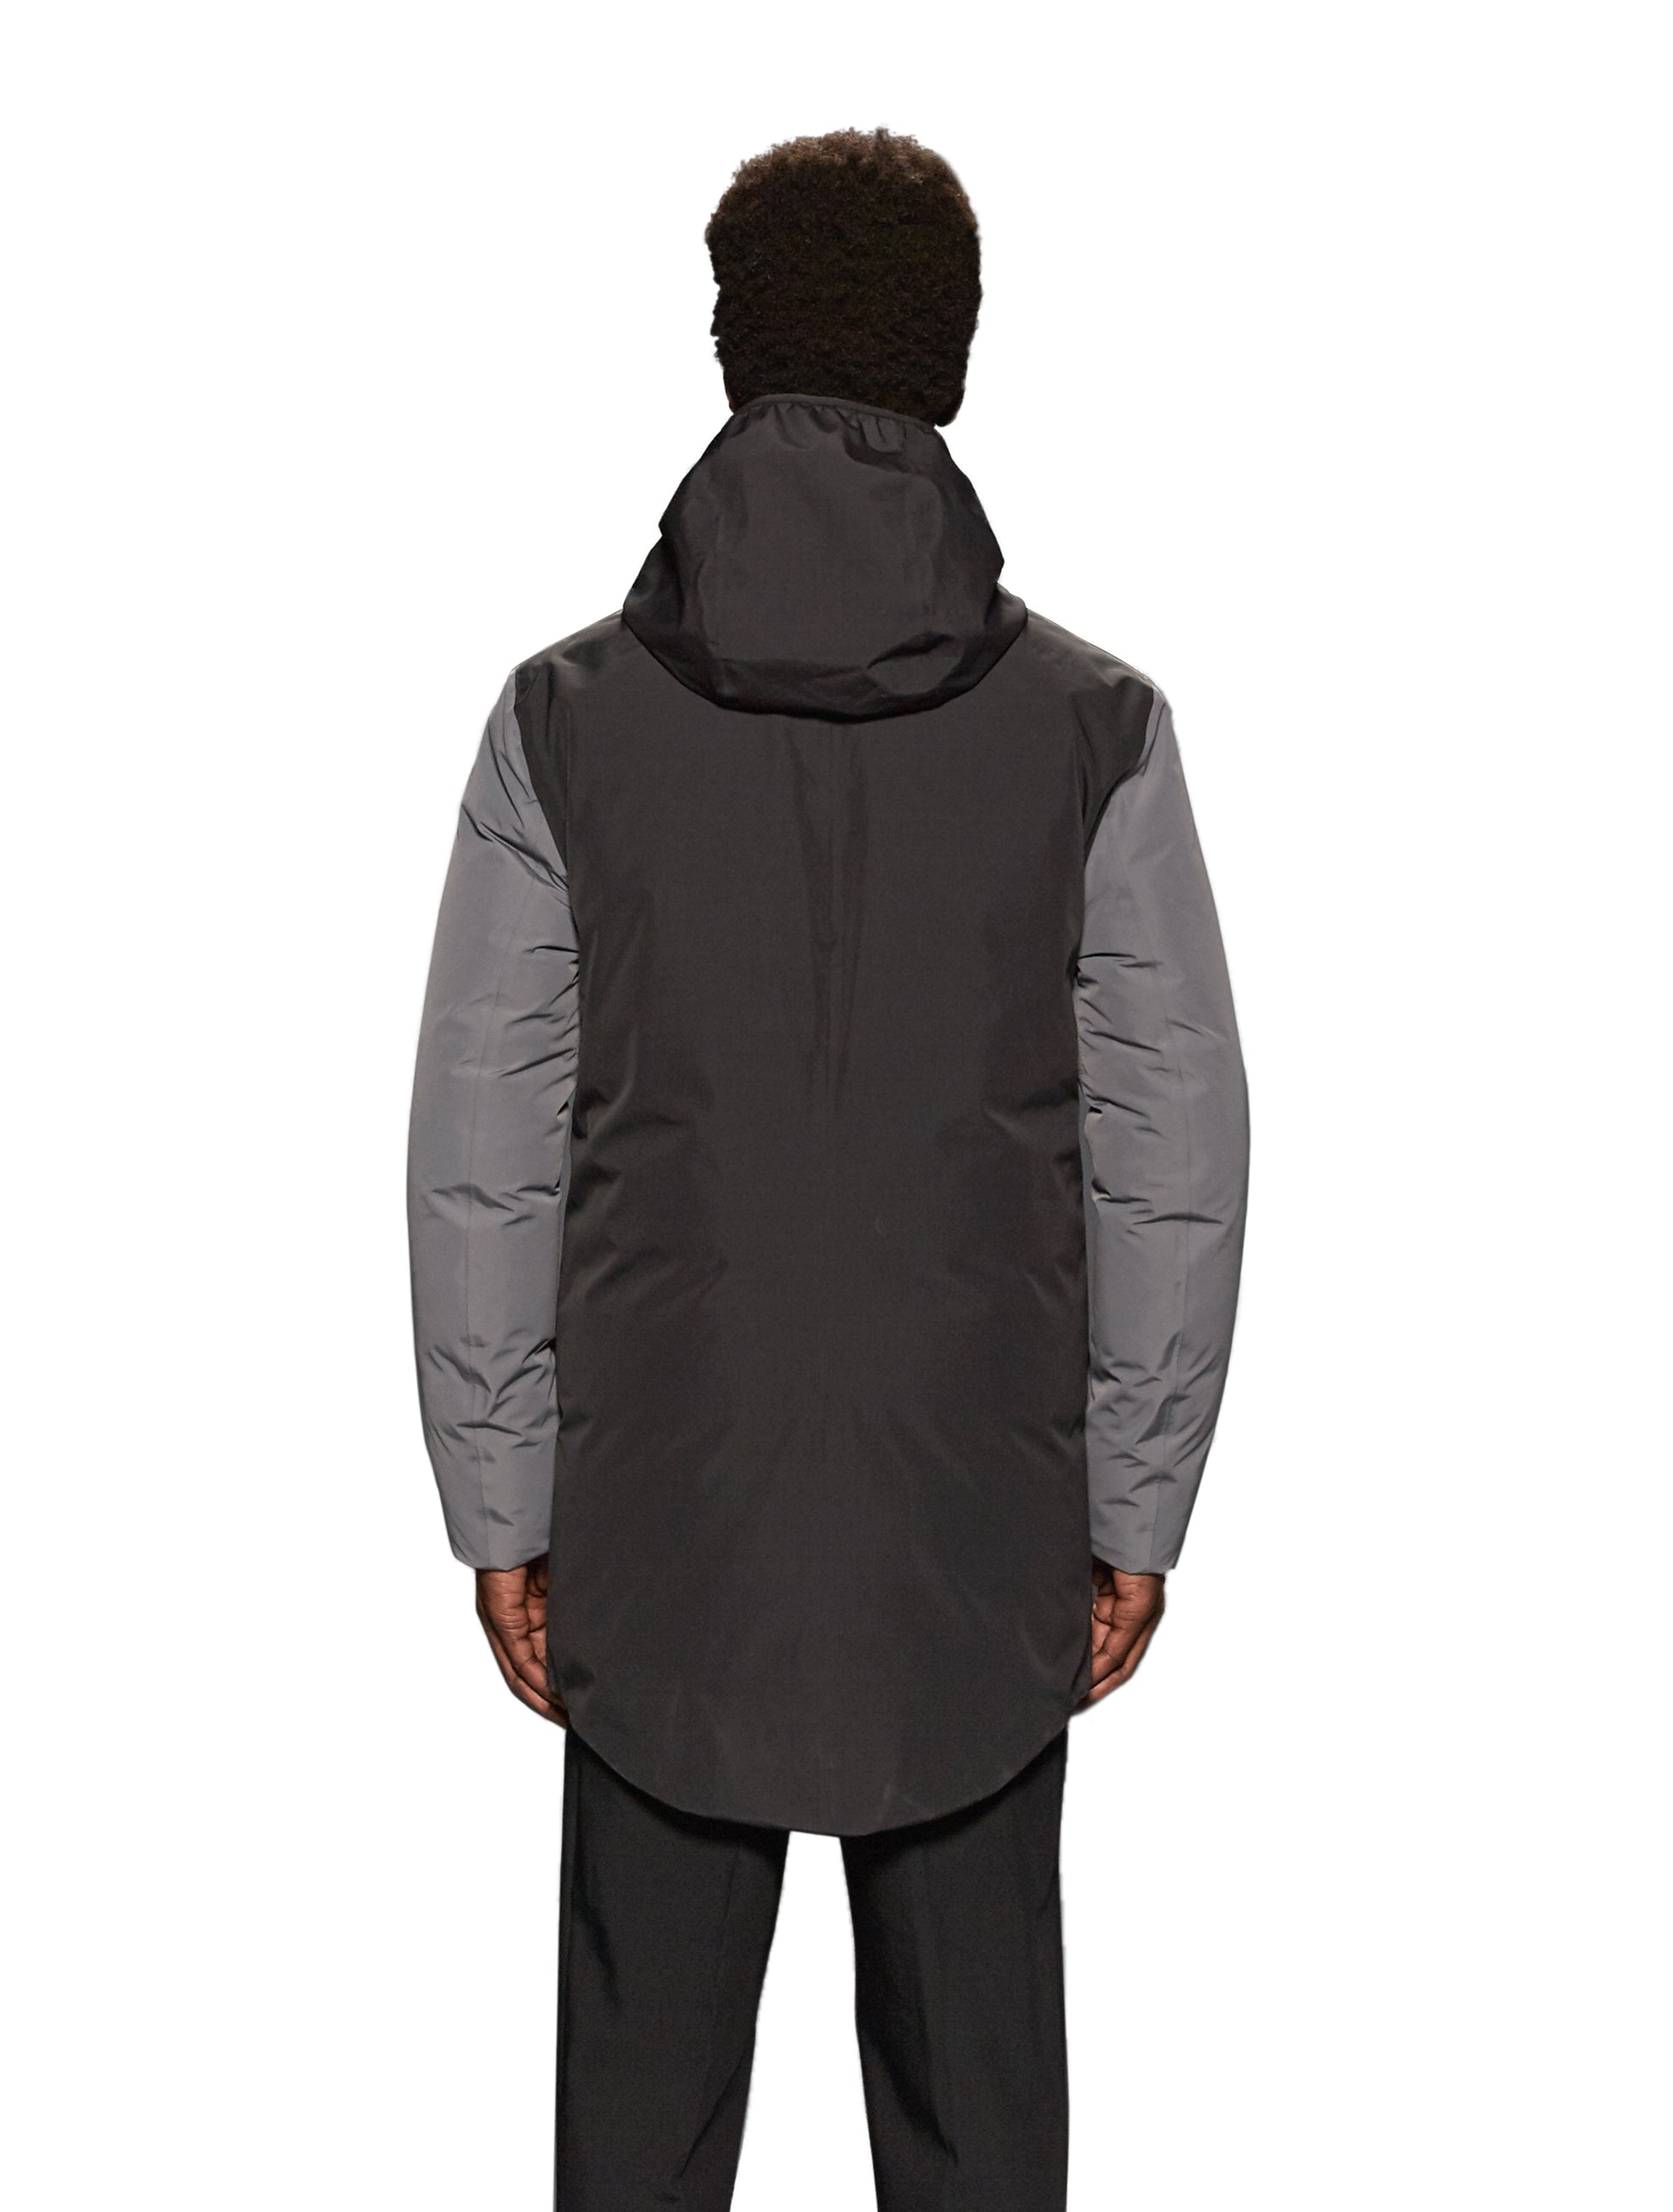 Unisex thigh length down parka with a contrast colour back panel, hidable waterproof hood, and hidden zipper pockets at chest and waist, in Concrete/Black